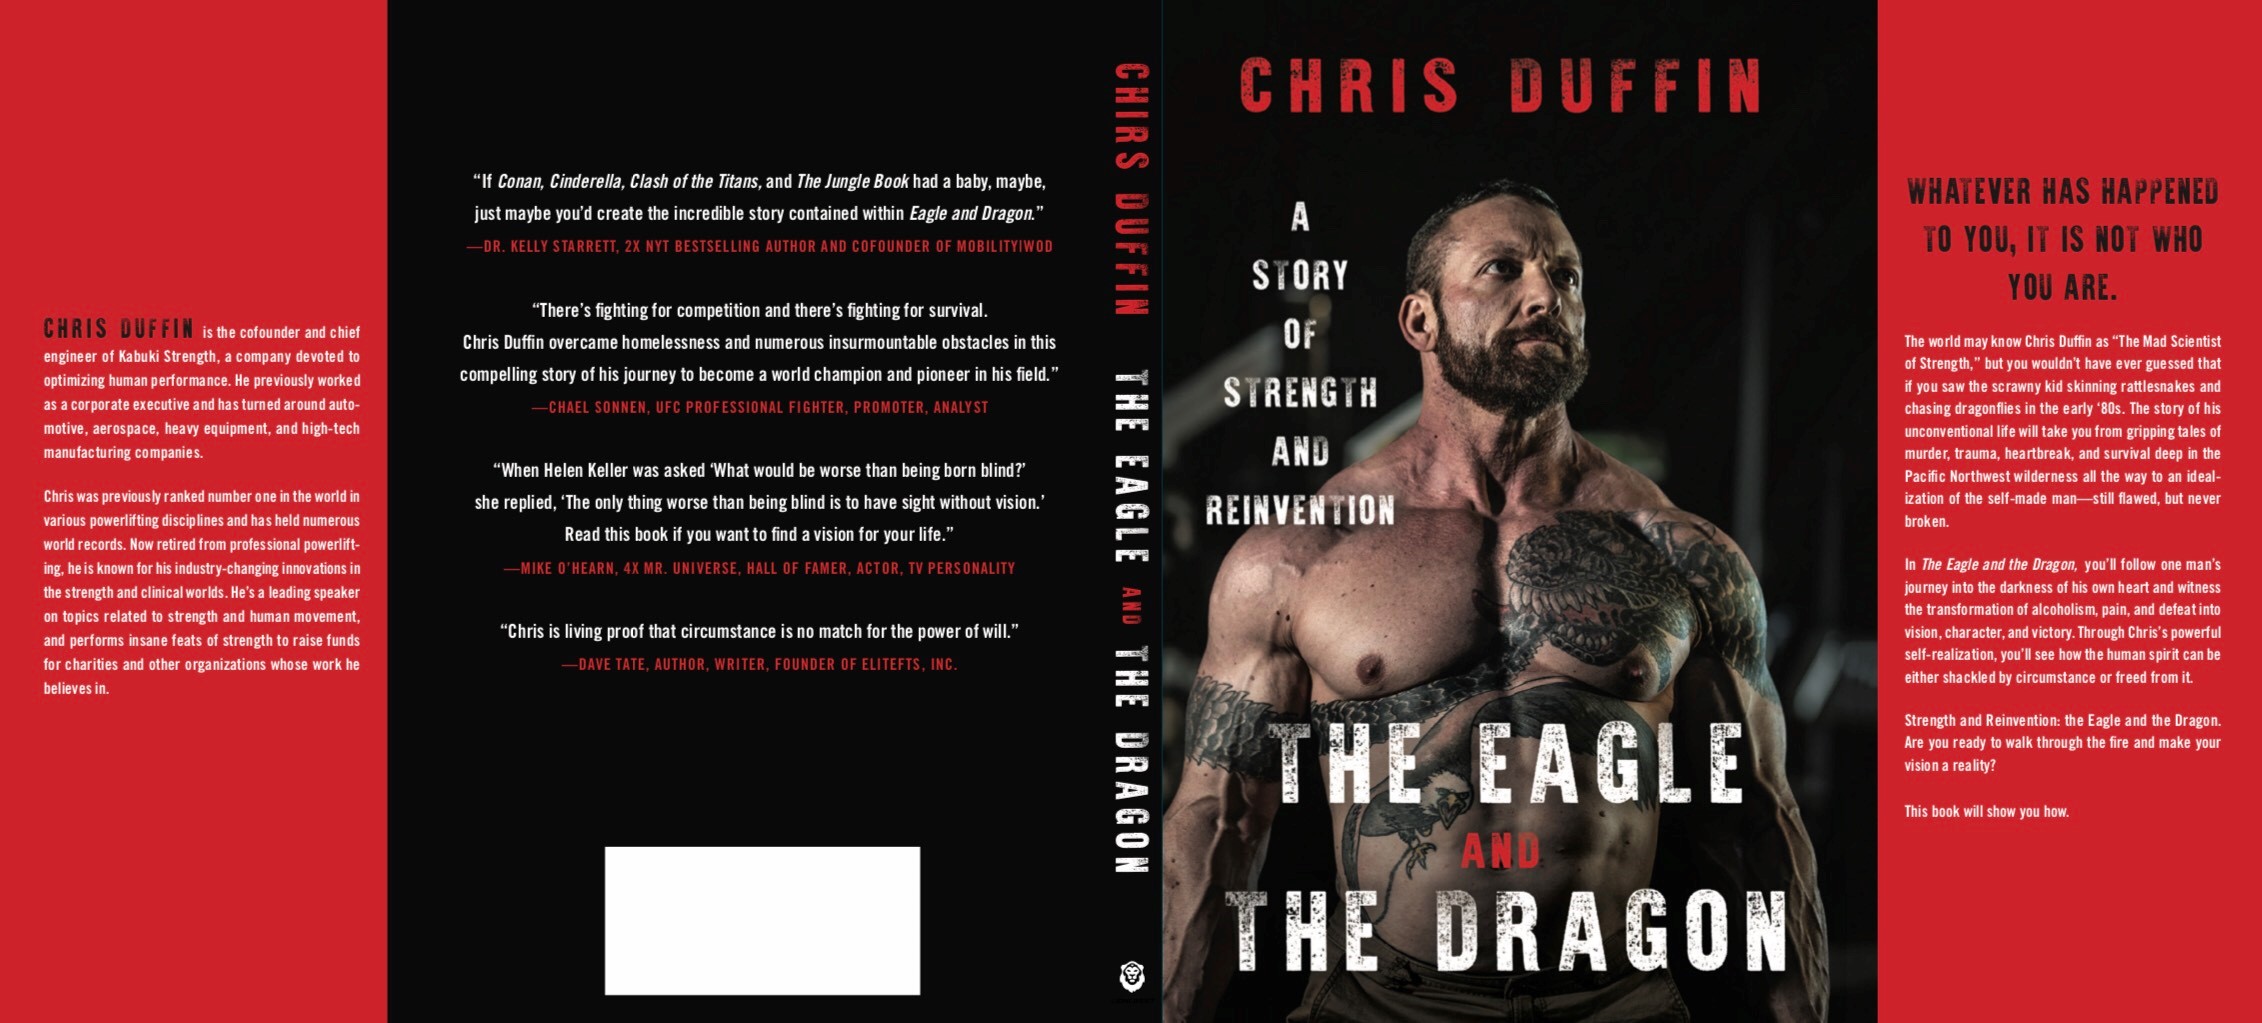 Chris Duffin Book Cover - The Eagle and The Dragon 